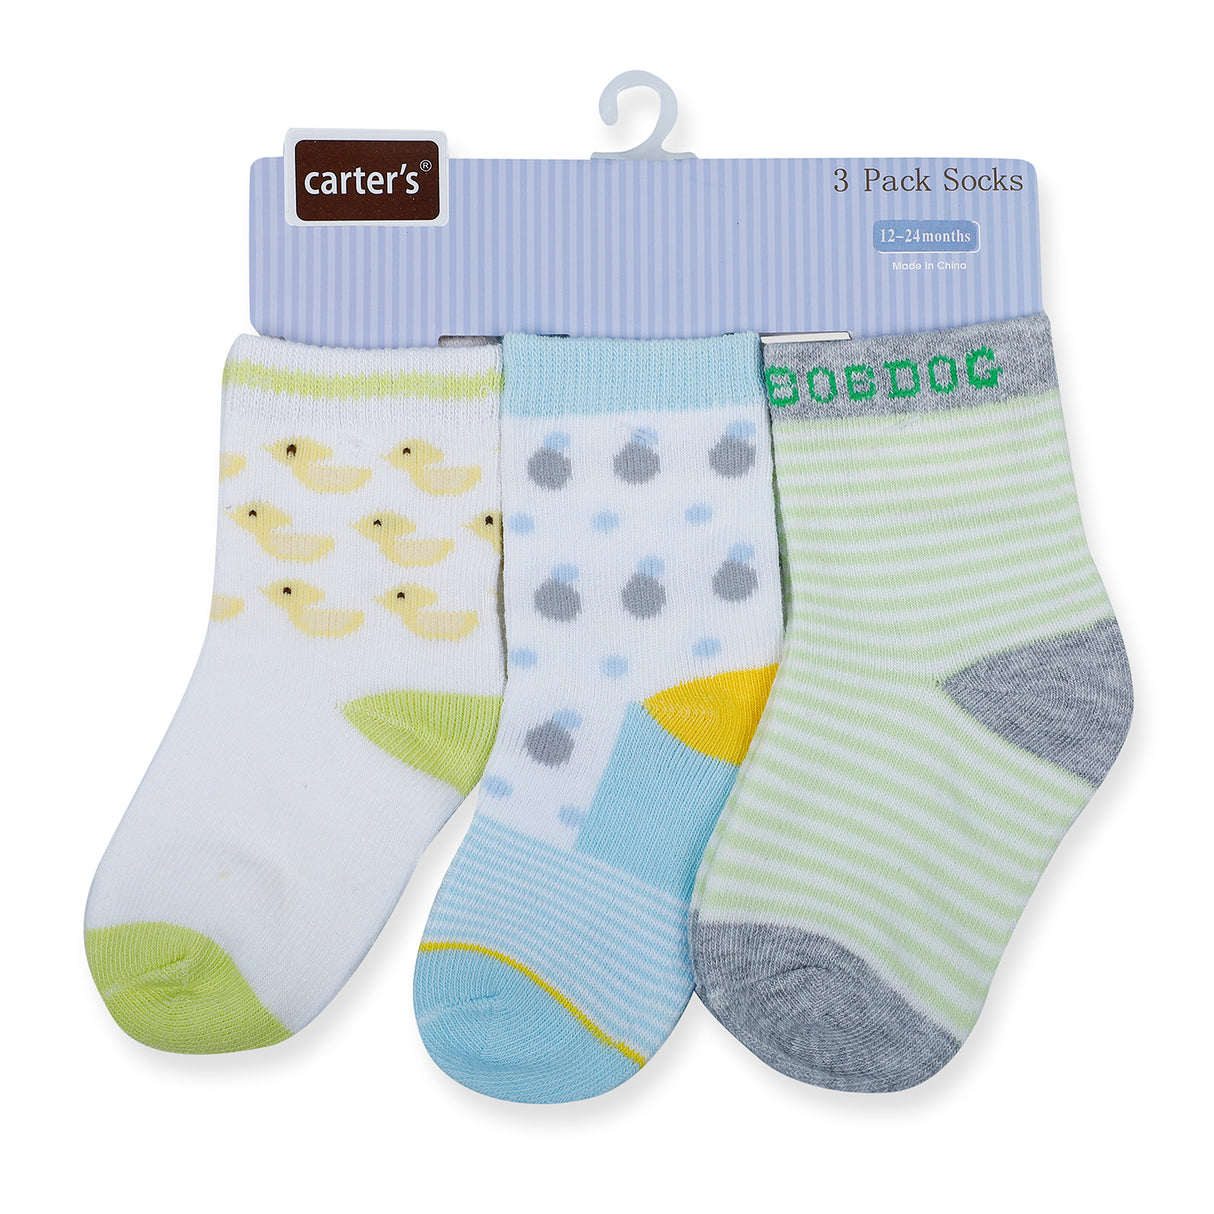 Carter's Printed Pack Of 3 Comfy Cotton Socks